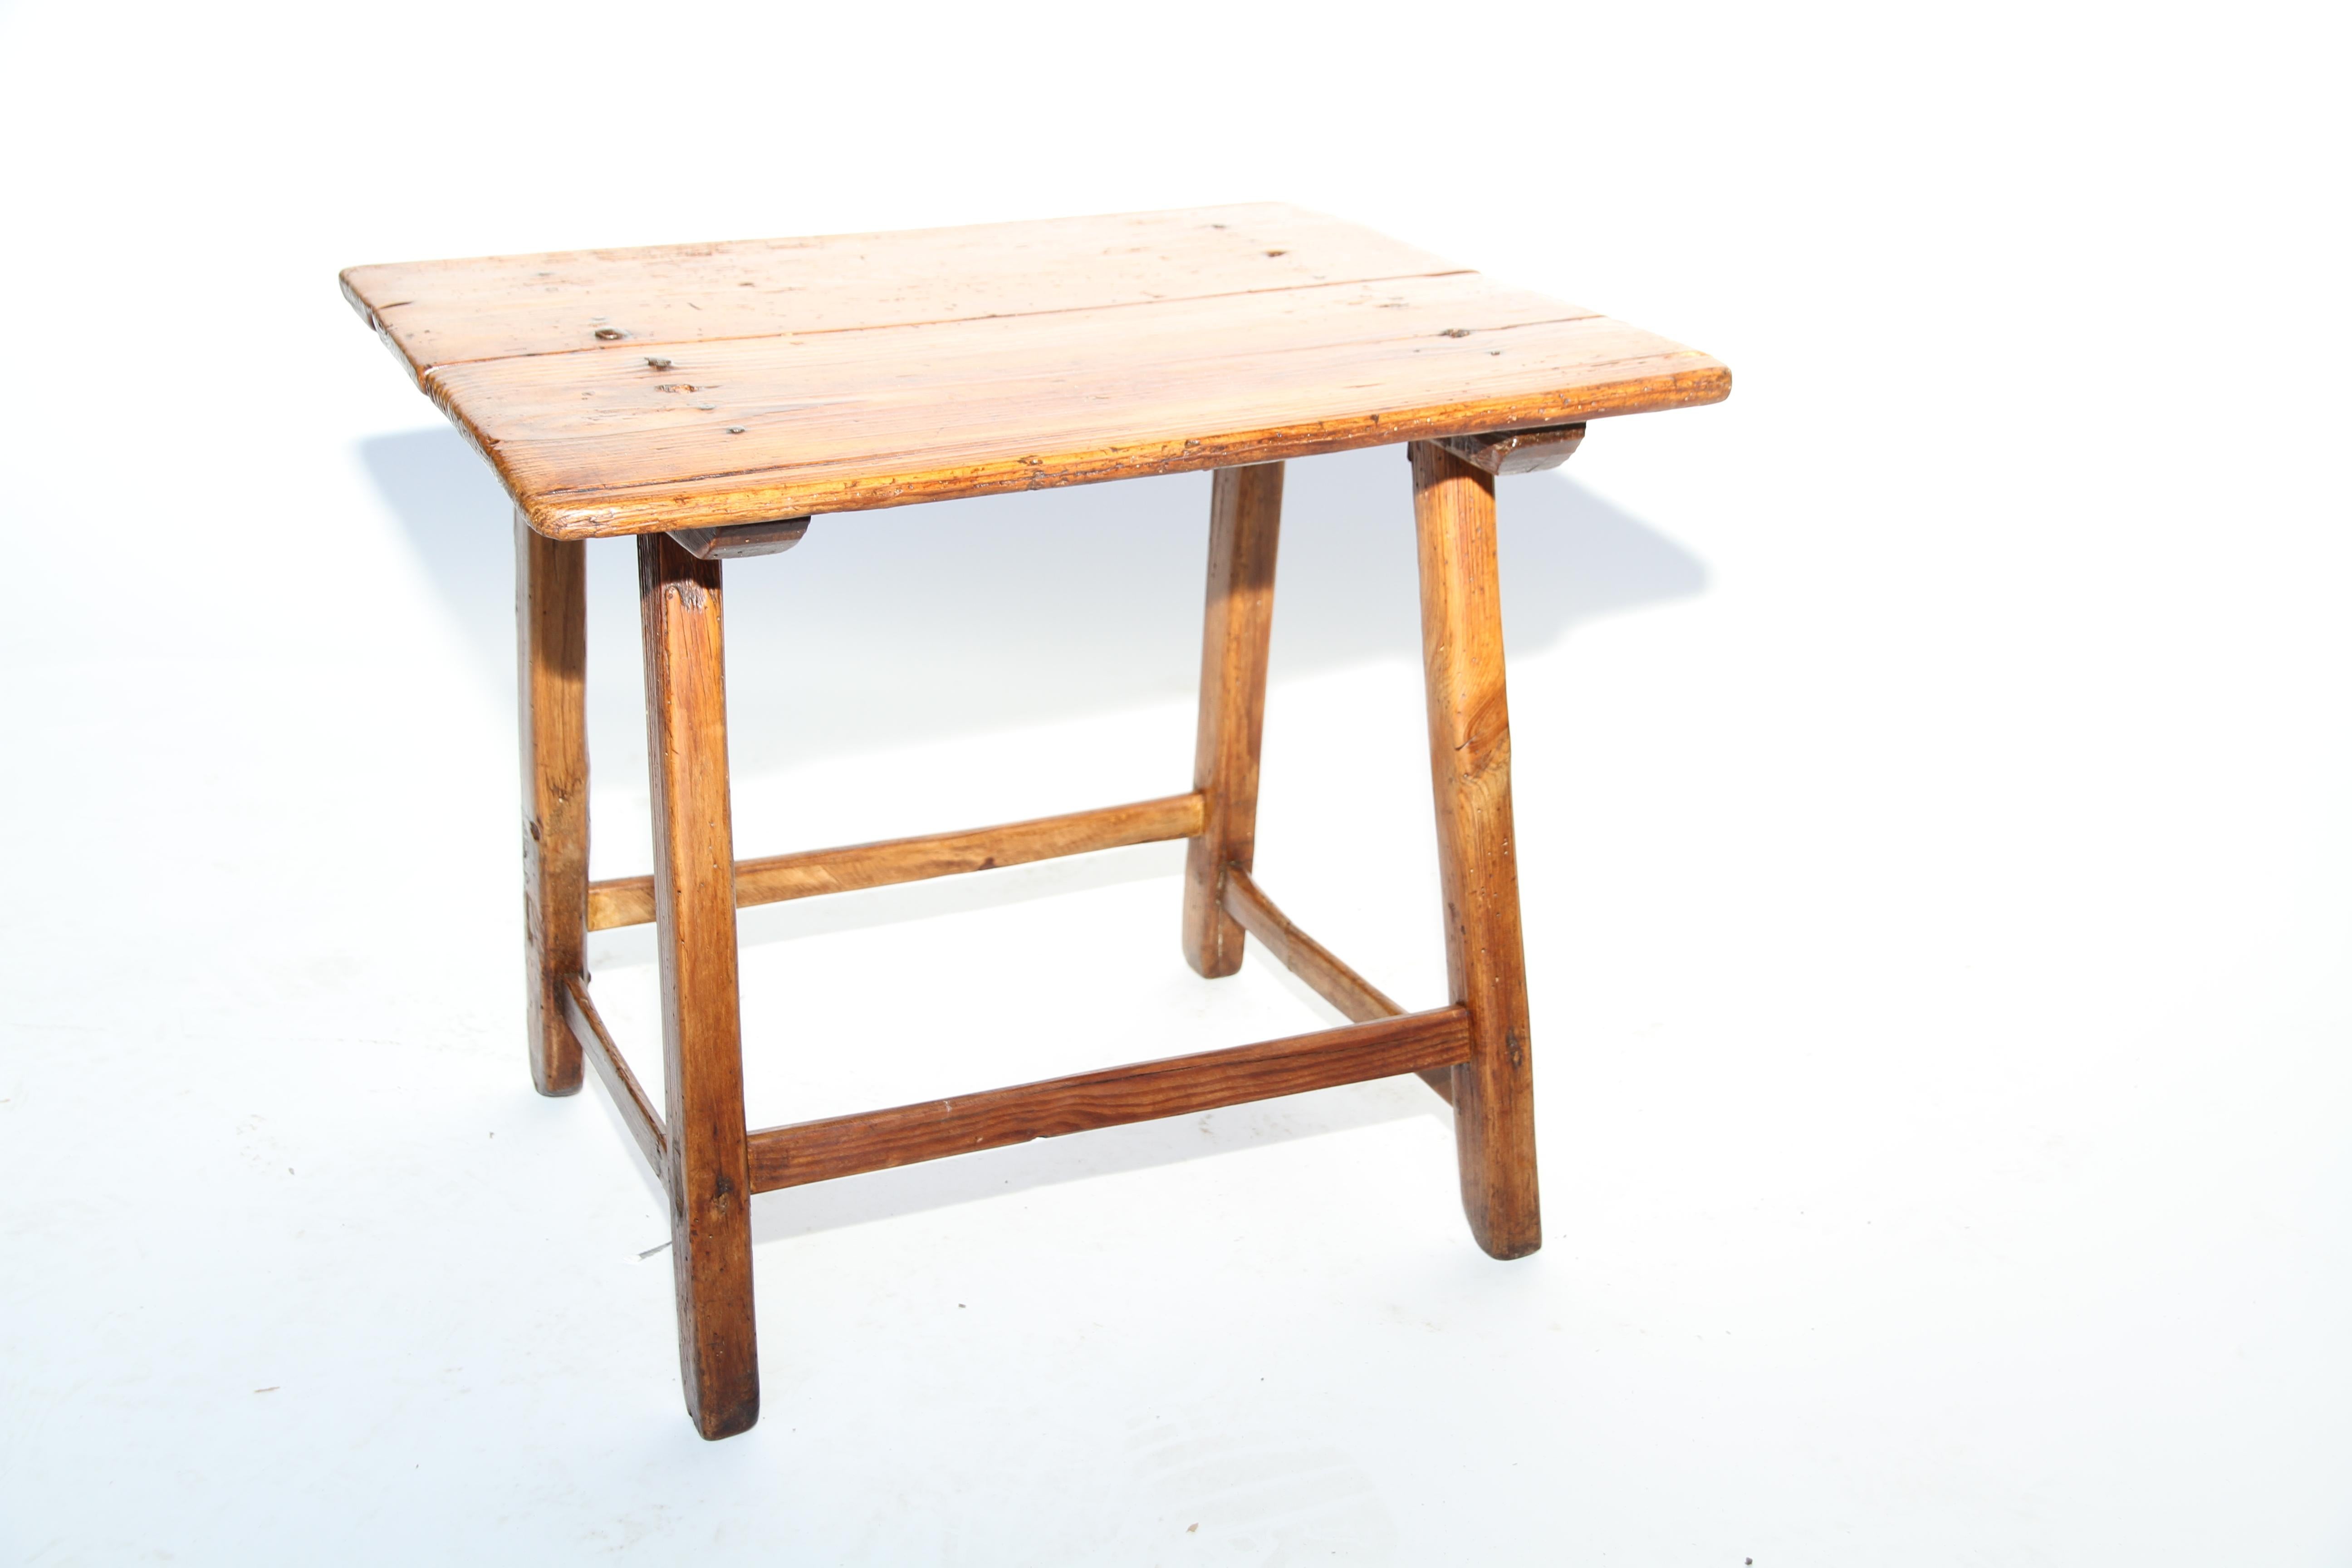 Hand-Crafted 19th Century Spanish Pine Low Table with Hand-Forged Iron Nail Detail